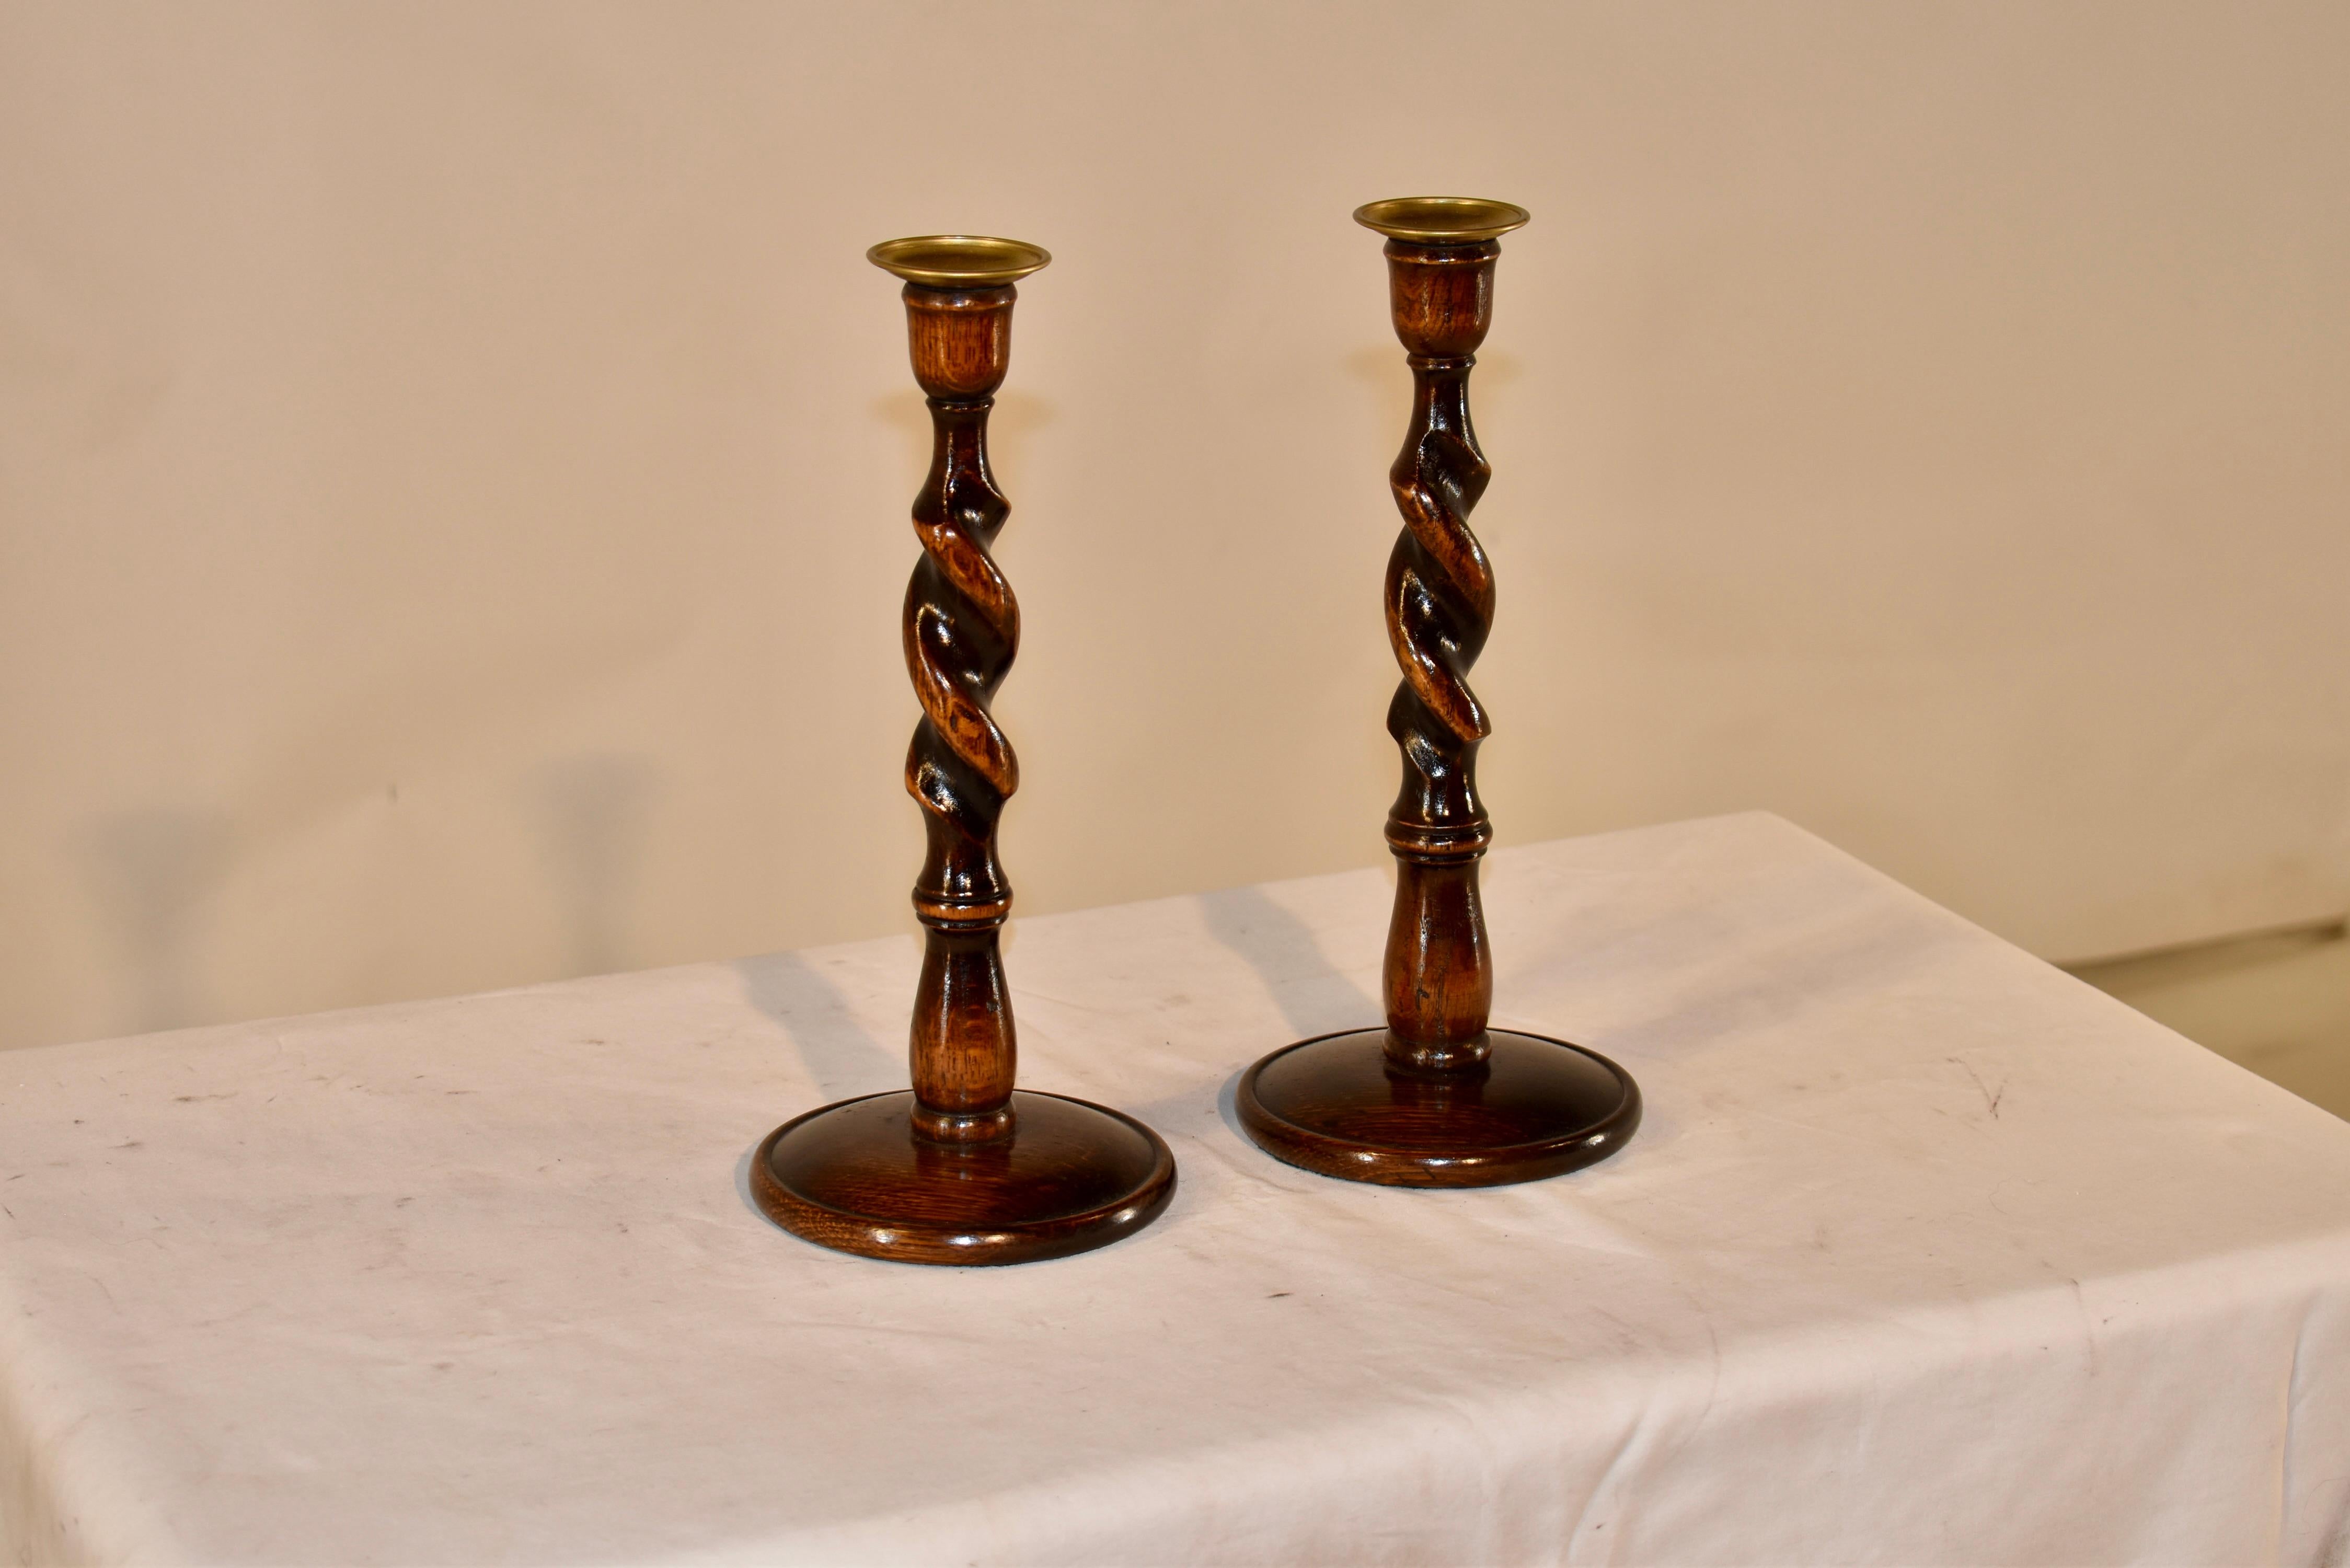 Pair of 19th century oak candlesticks from England with hand cast brass candle cups, supported on hand turned barley twist stems supported on hand turned dish shaped bases.